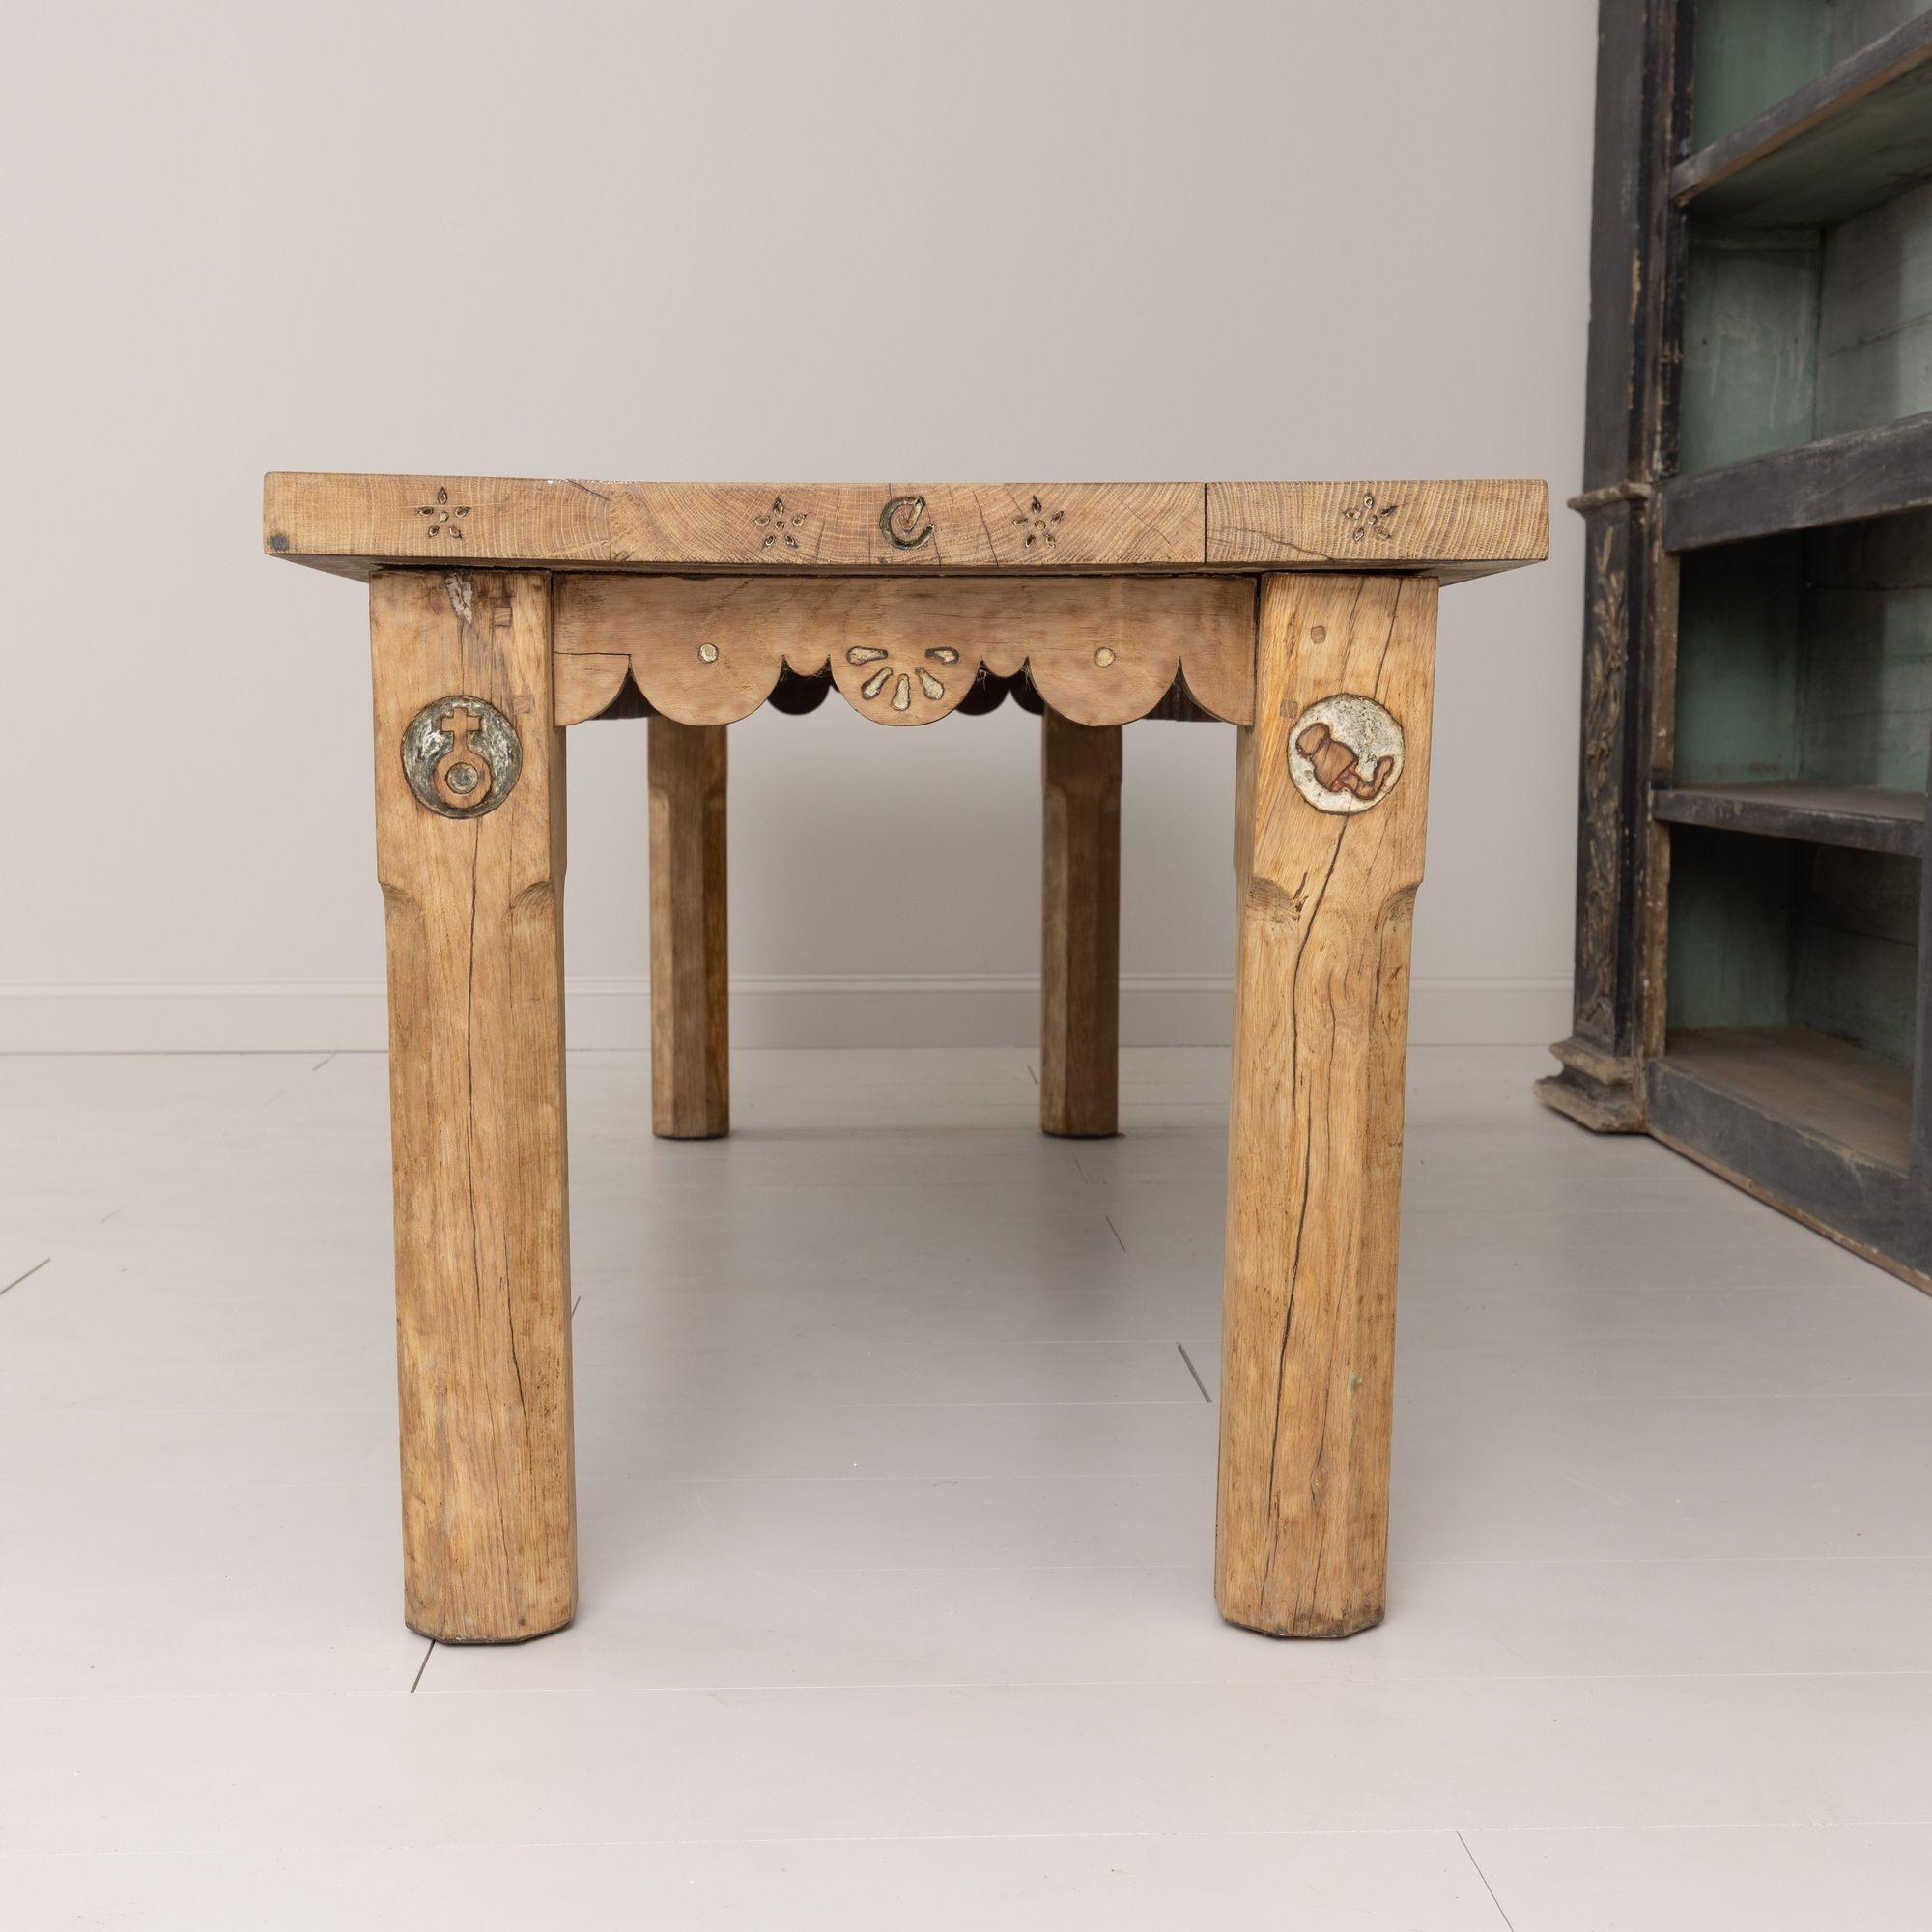 19th c. French Oak Farm Table with Scalloped Apron and Latin Carvings 1